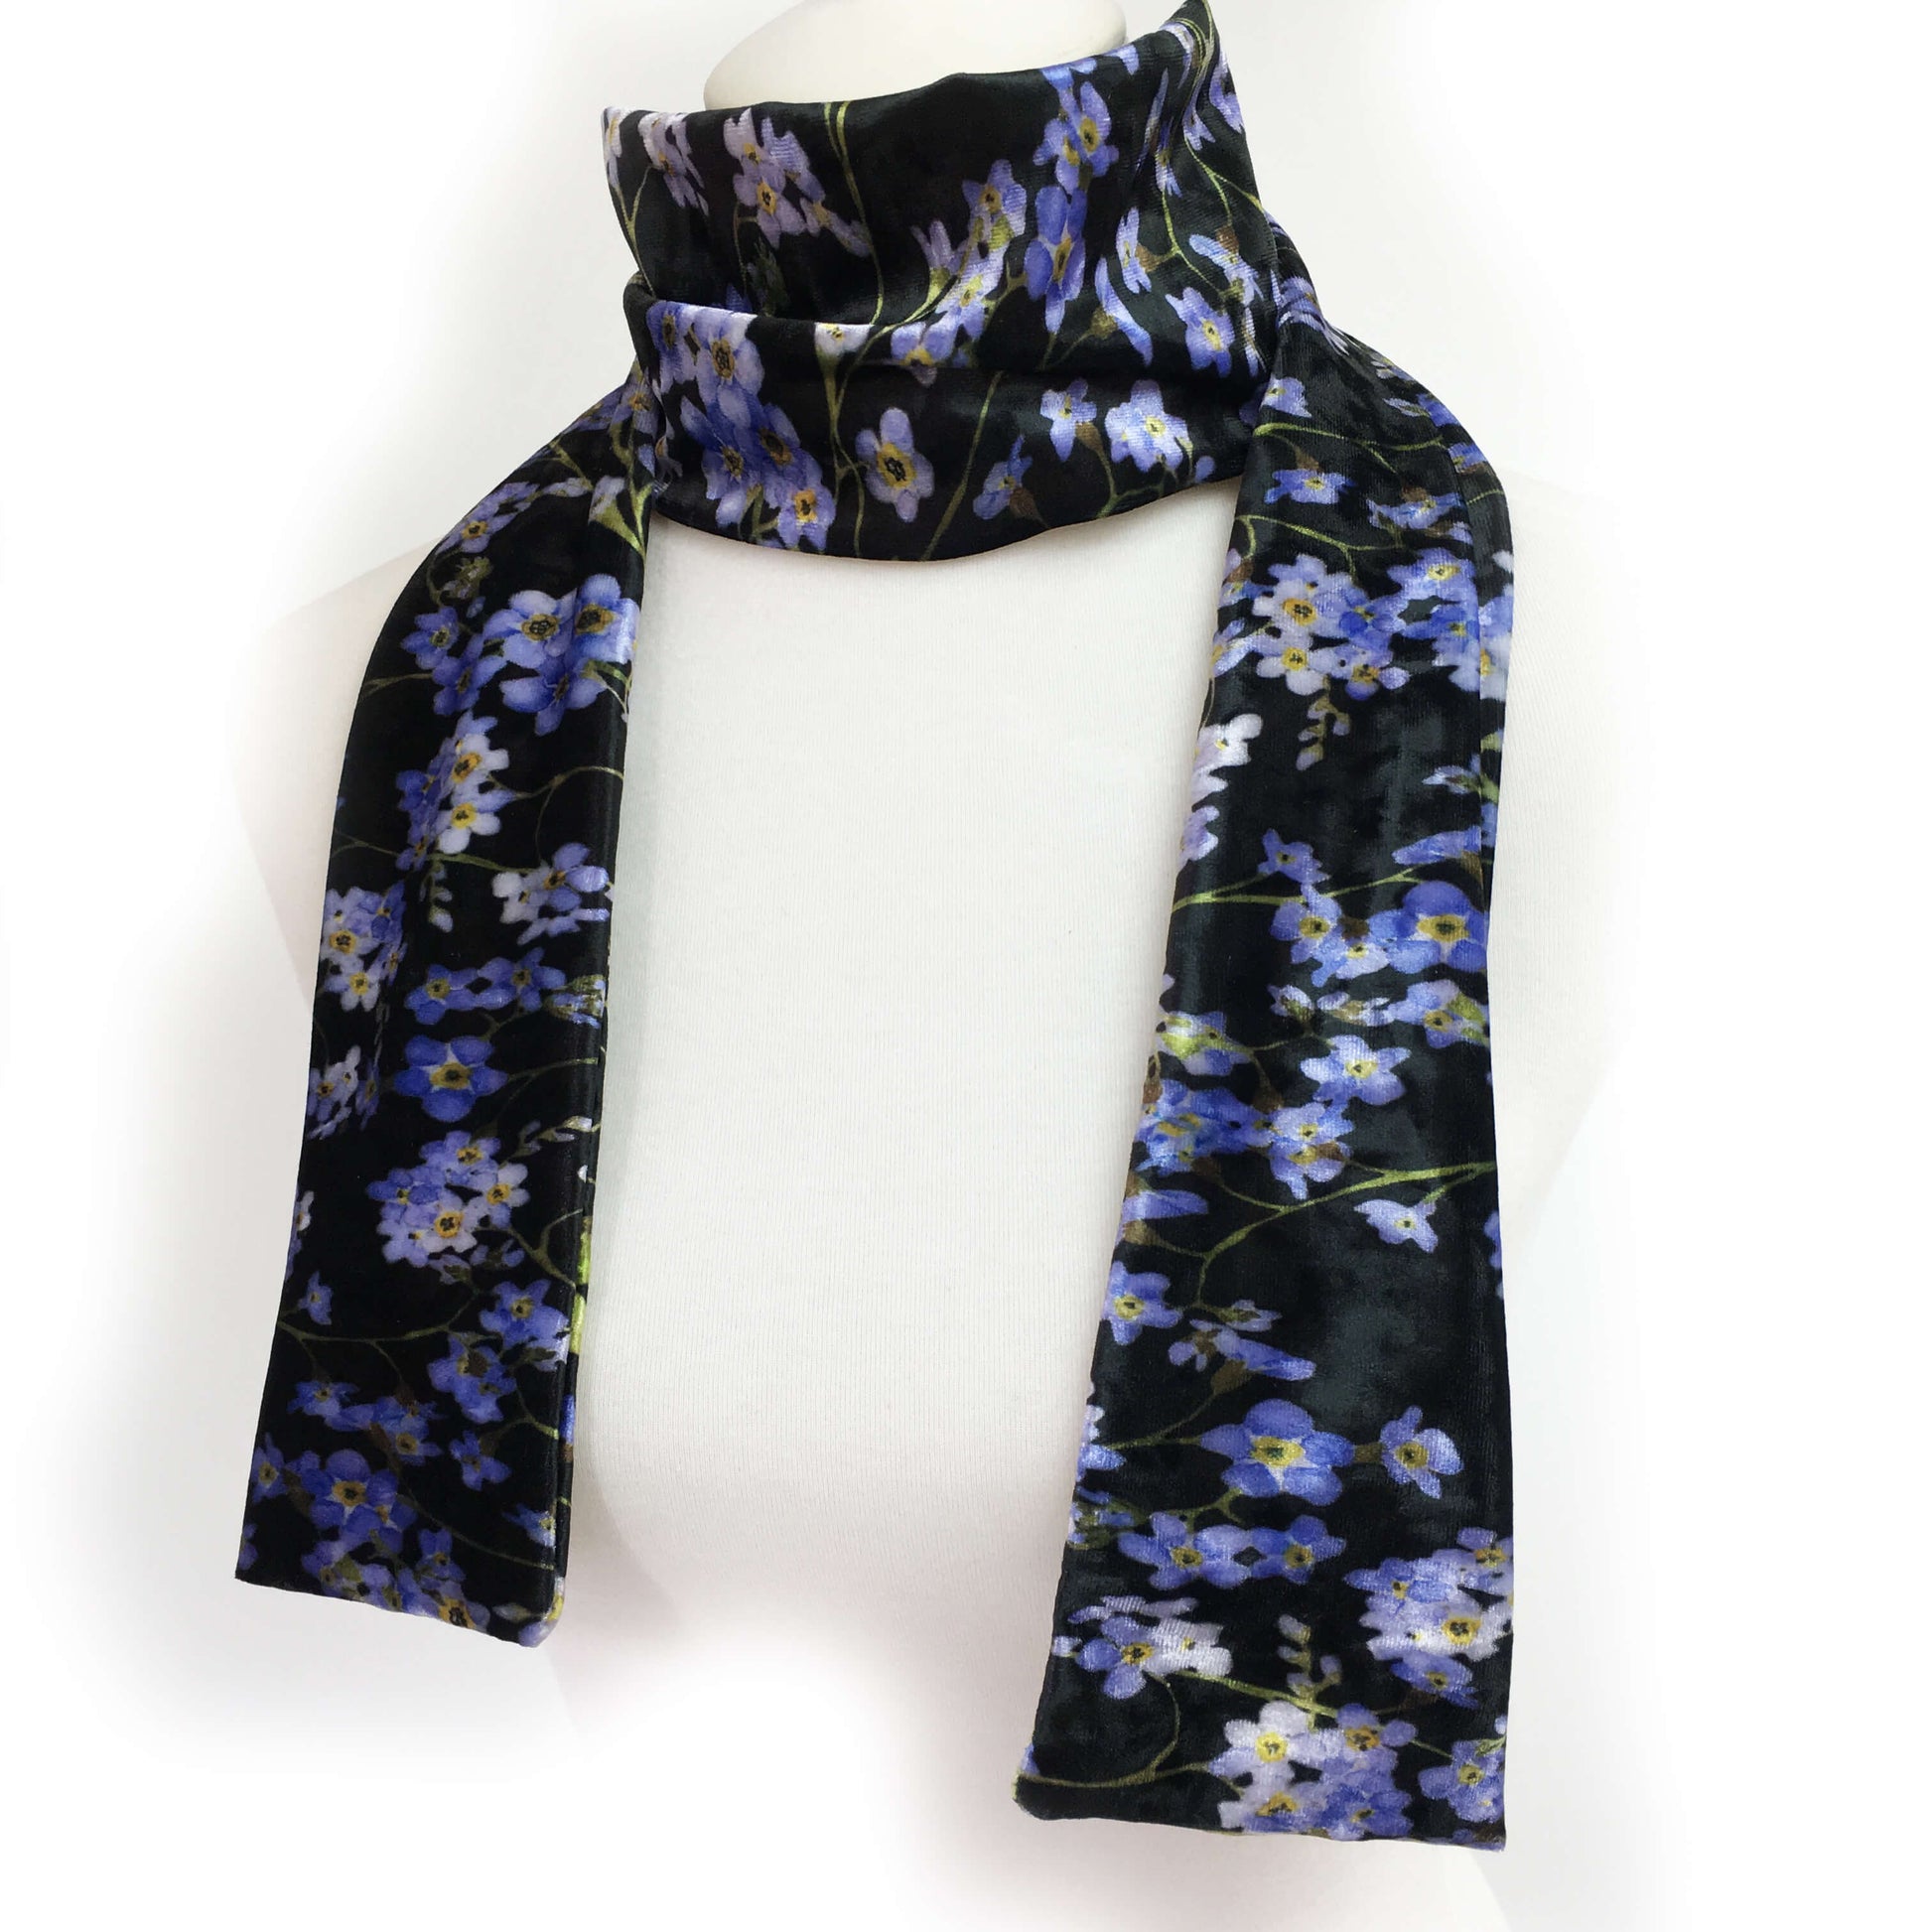 Forget-Me-Not Watercolor Scarf on Black - All season velour - UndertheLeafDesigns.com